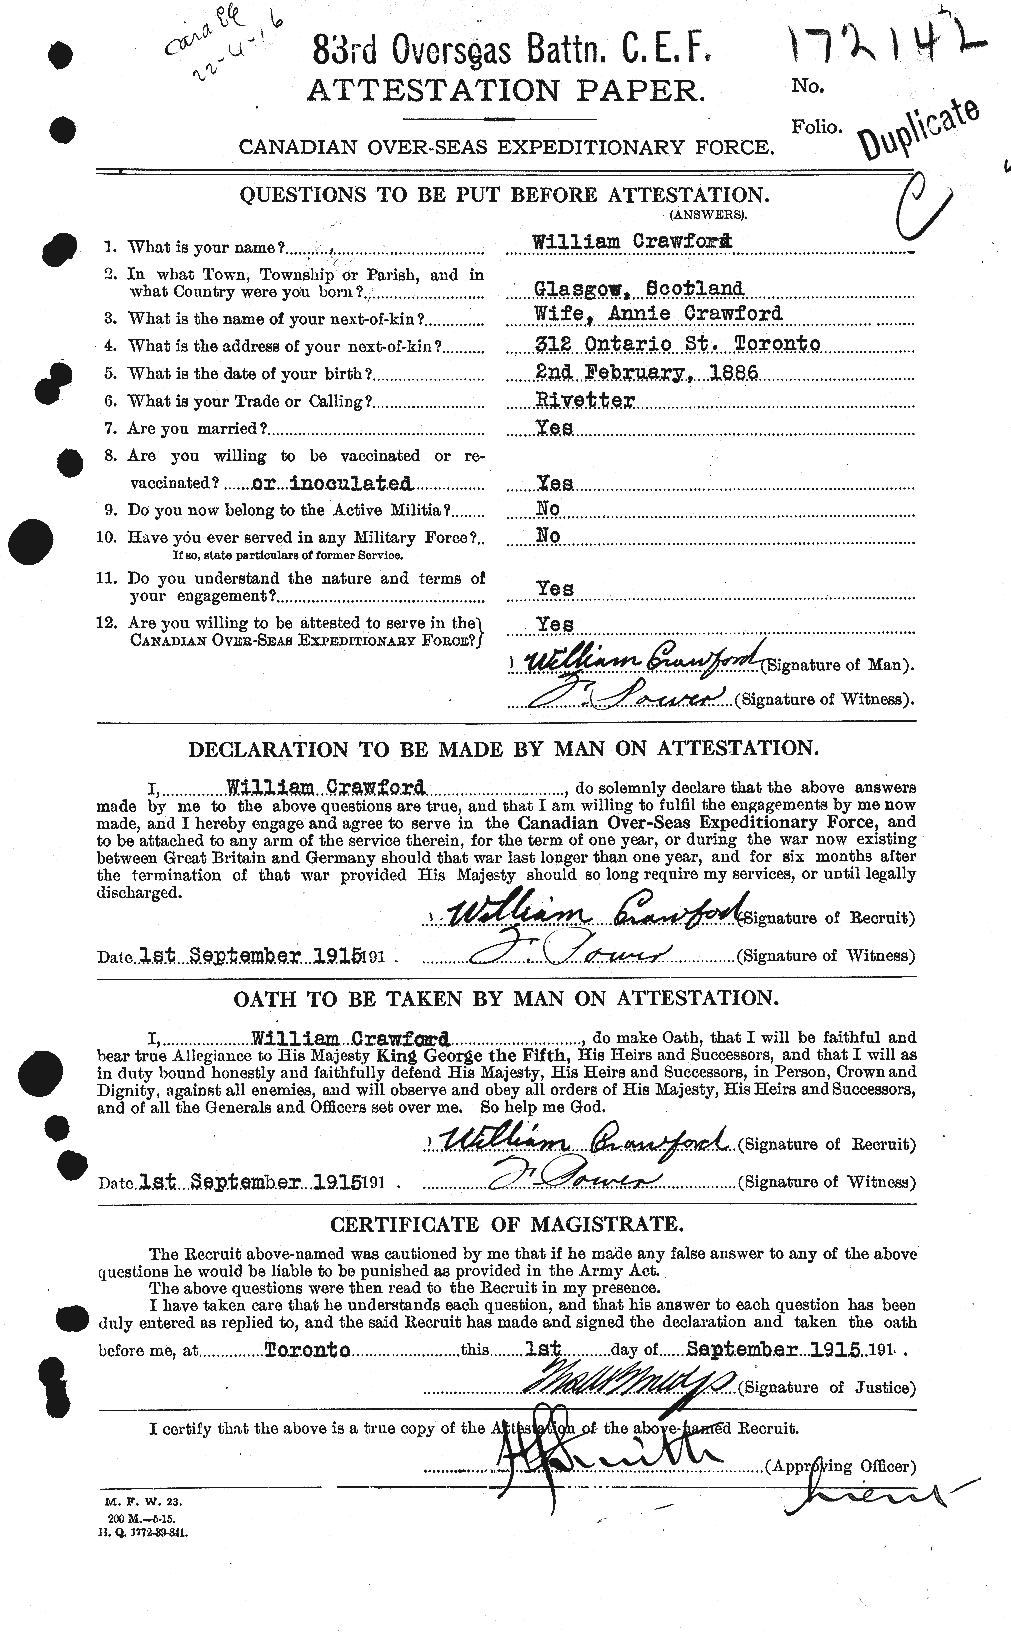 Personnel Records of the First World War - CEF 061161a